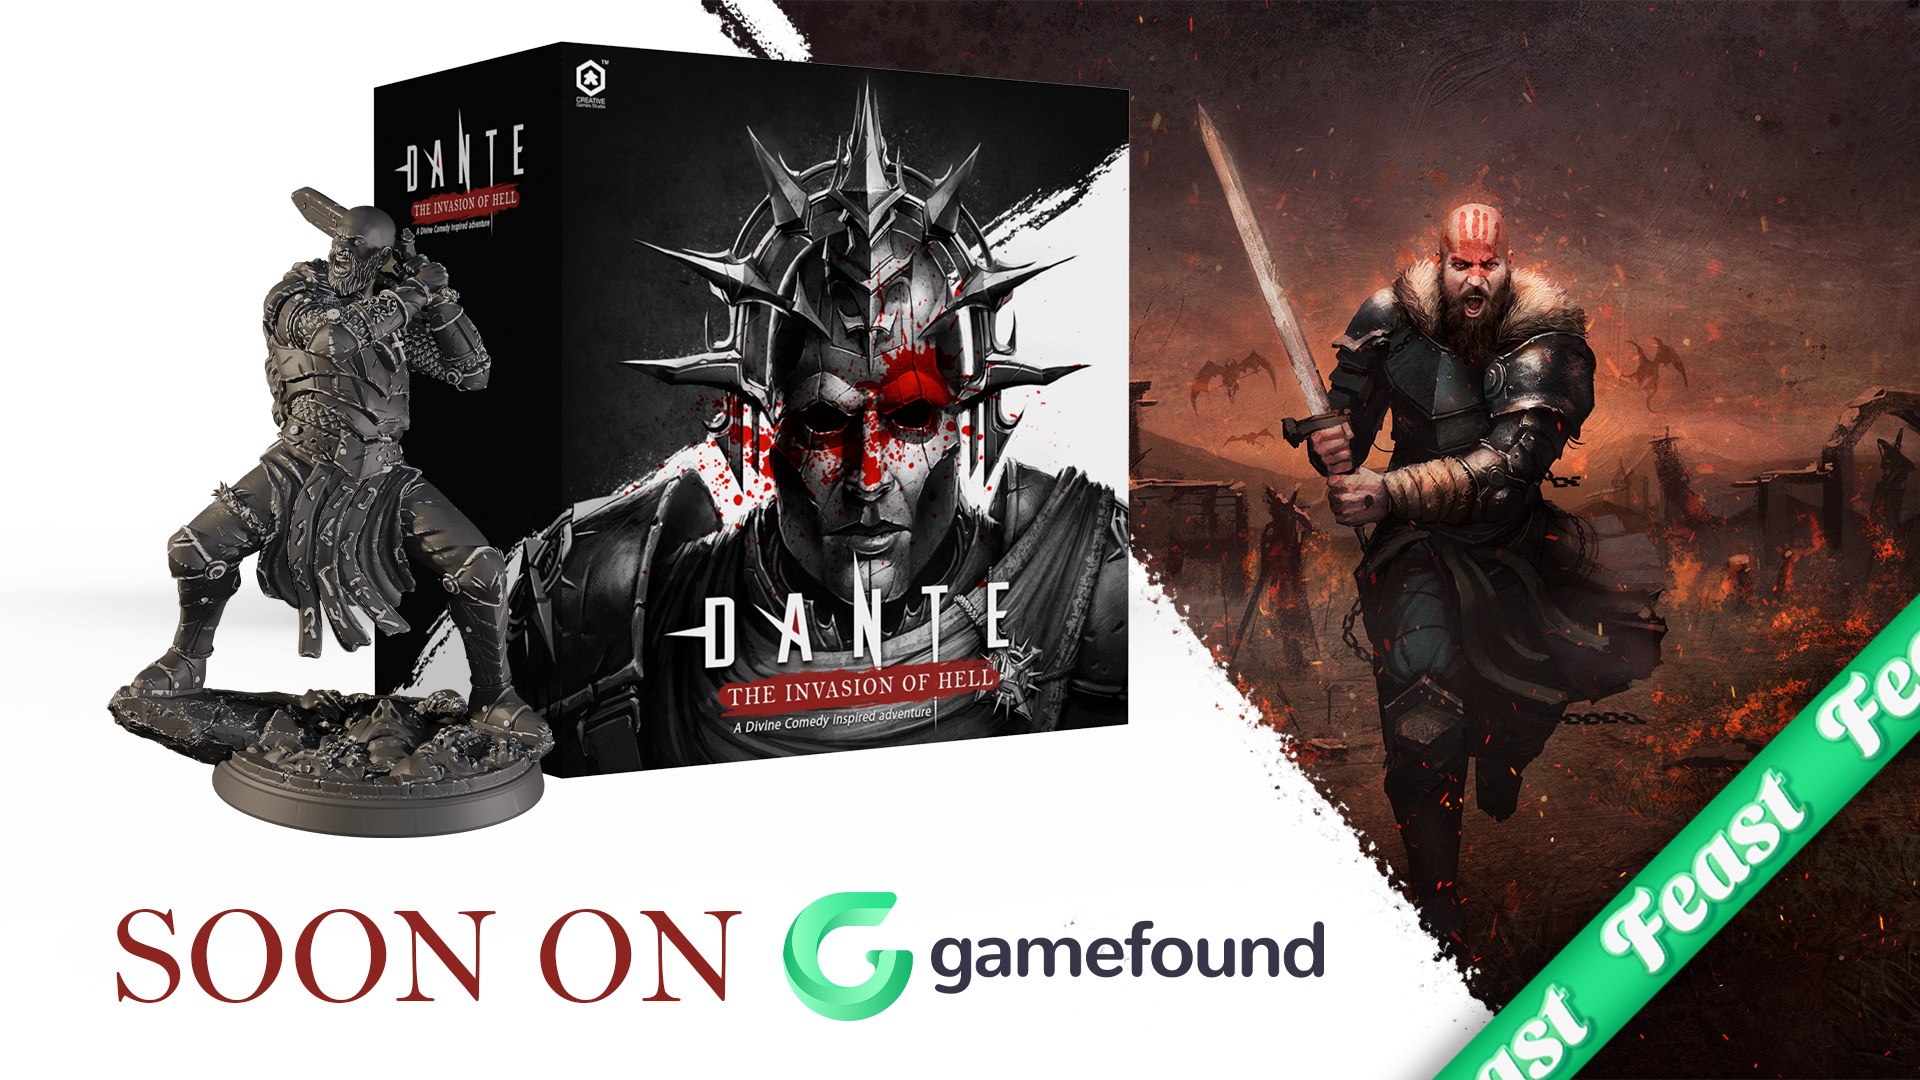 Check out DANTE: The Invasion of Hell on Gamefound